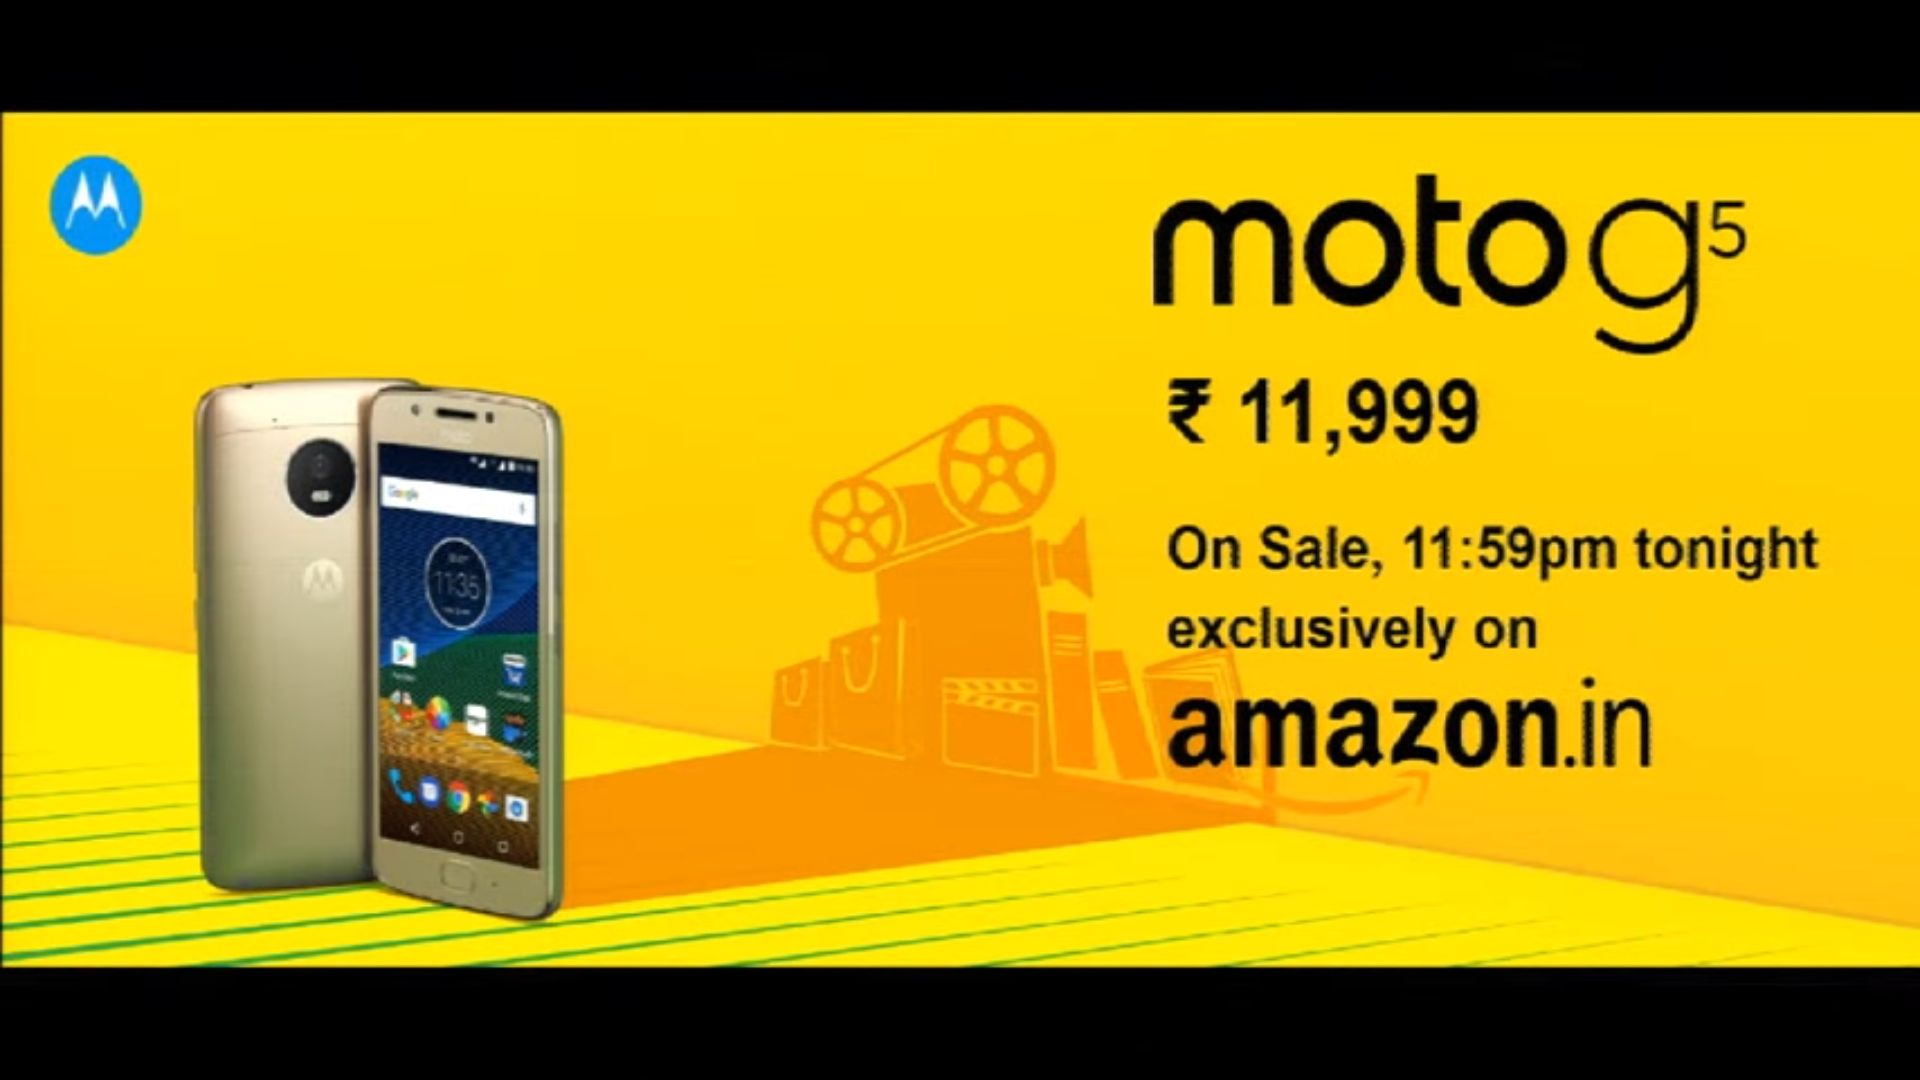 Motorola Launched Moto G5 In India @ Rs.11,999